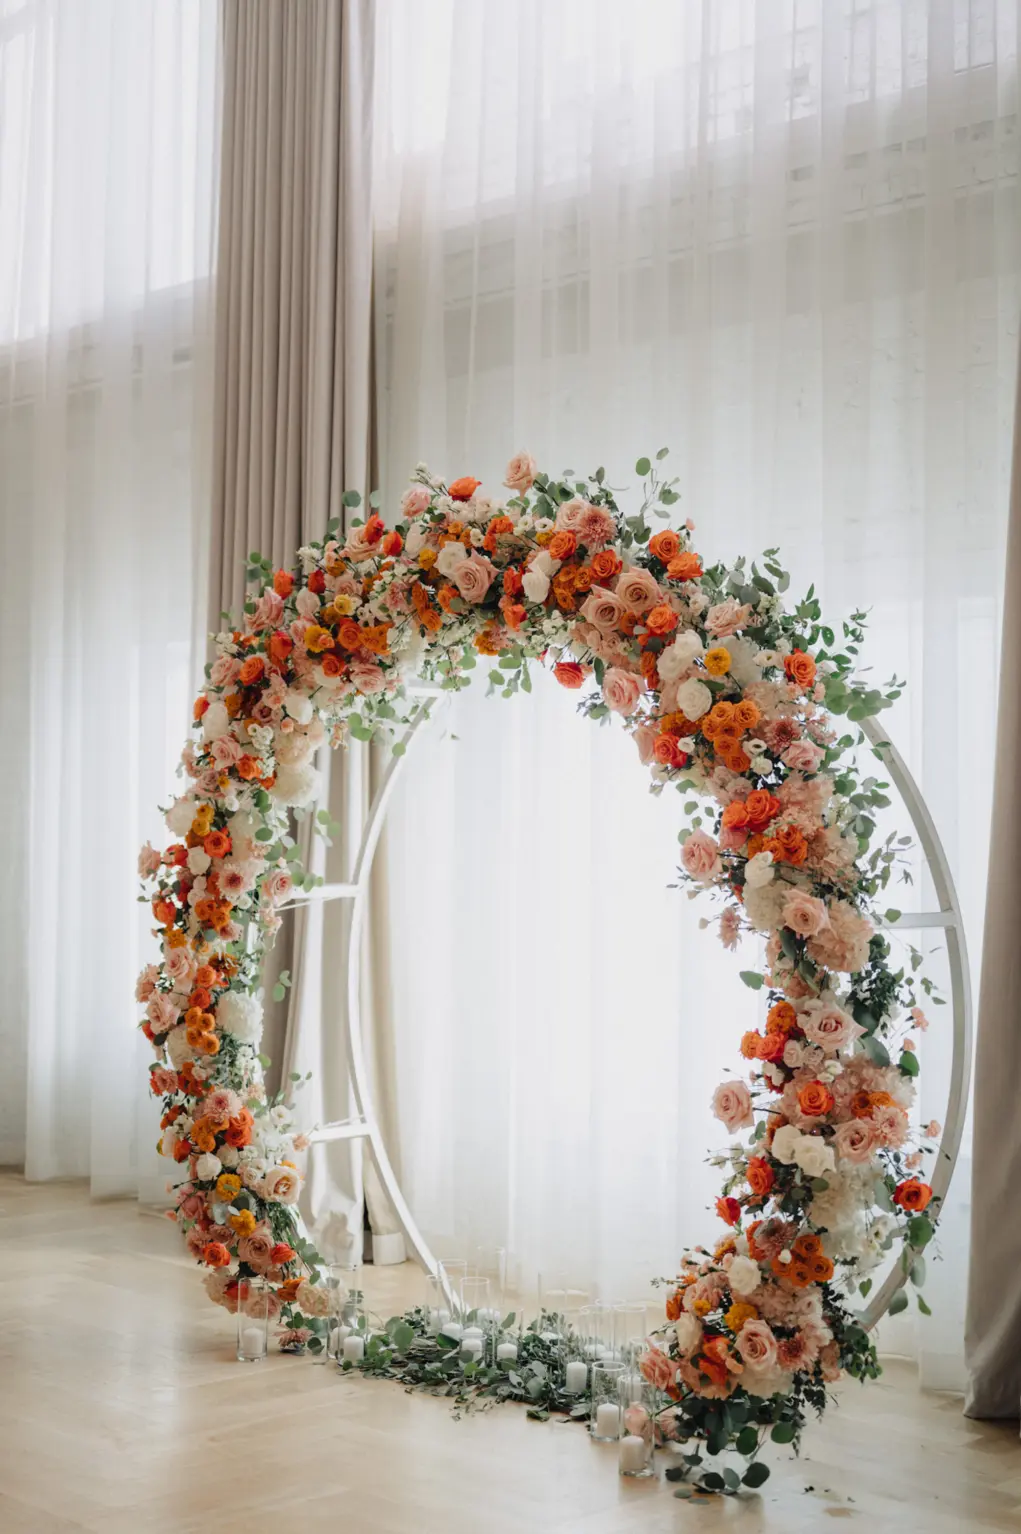 Pink Roses, Orange Carnations, White Hydrangeas, and Greenery for Circular Arch | Spring Wedding Ceremony Decor Ideas